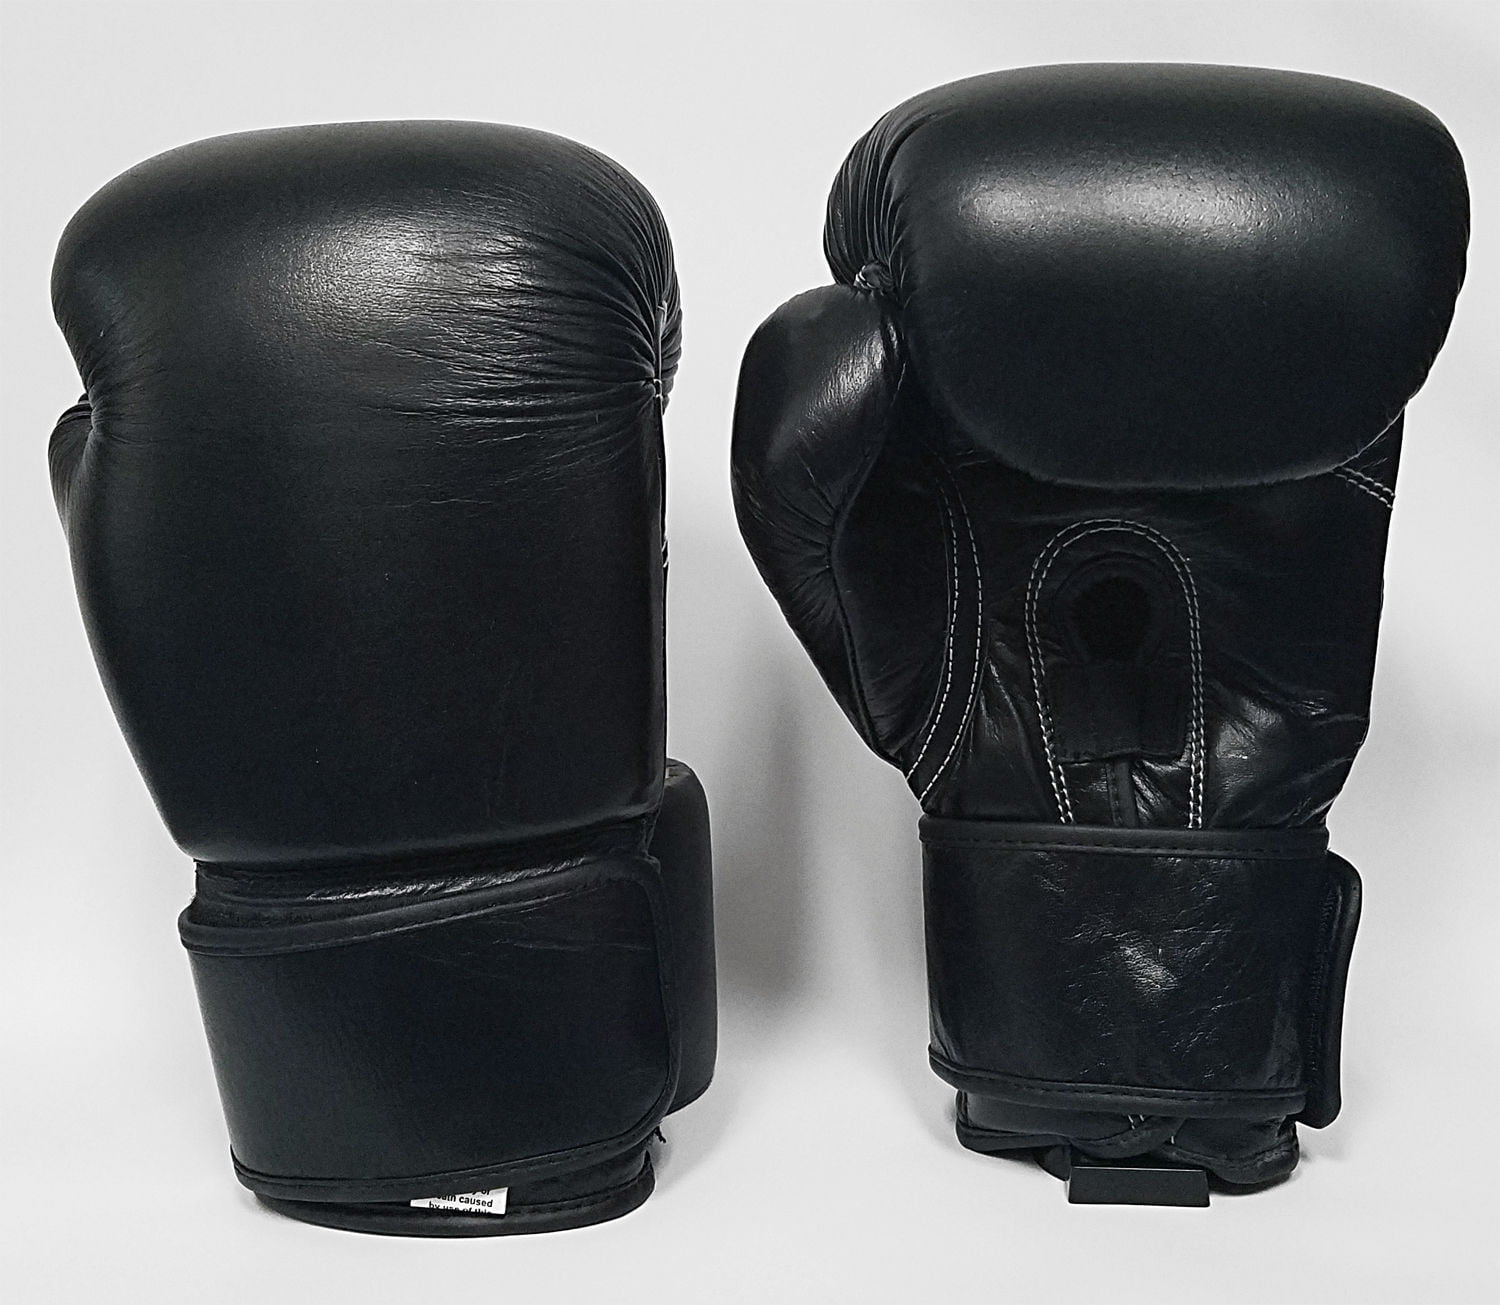 New Black Leather Boxing Gloves 10 oz Unbranded 